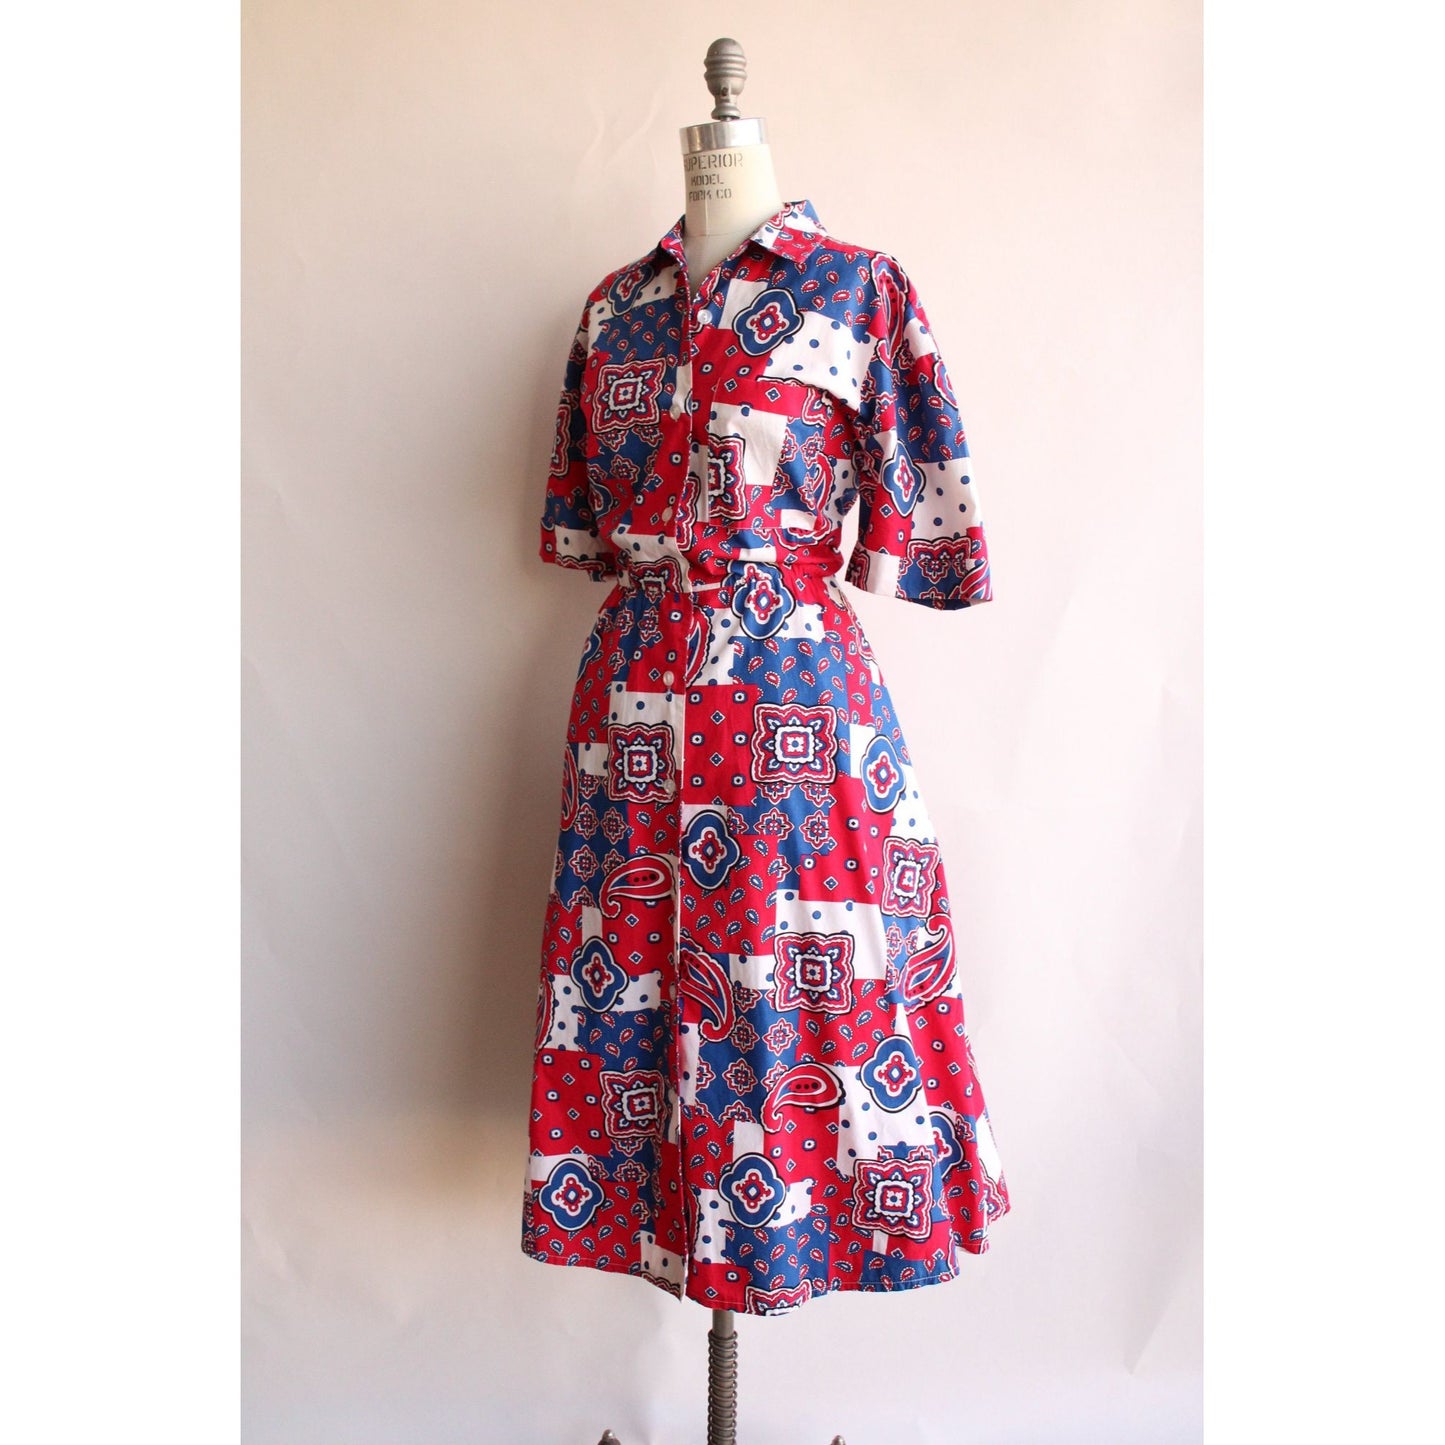 Vintage 1980s Does 1950s Shirtwaist Dress With Pockets